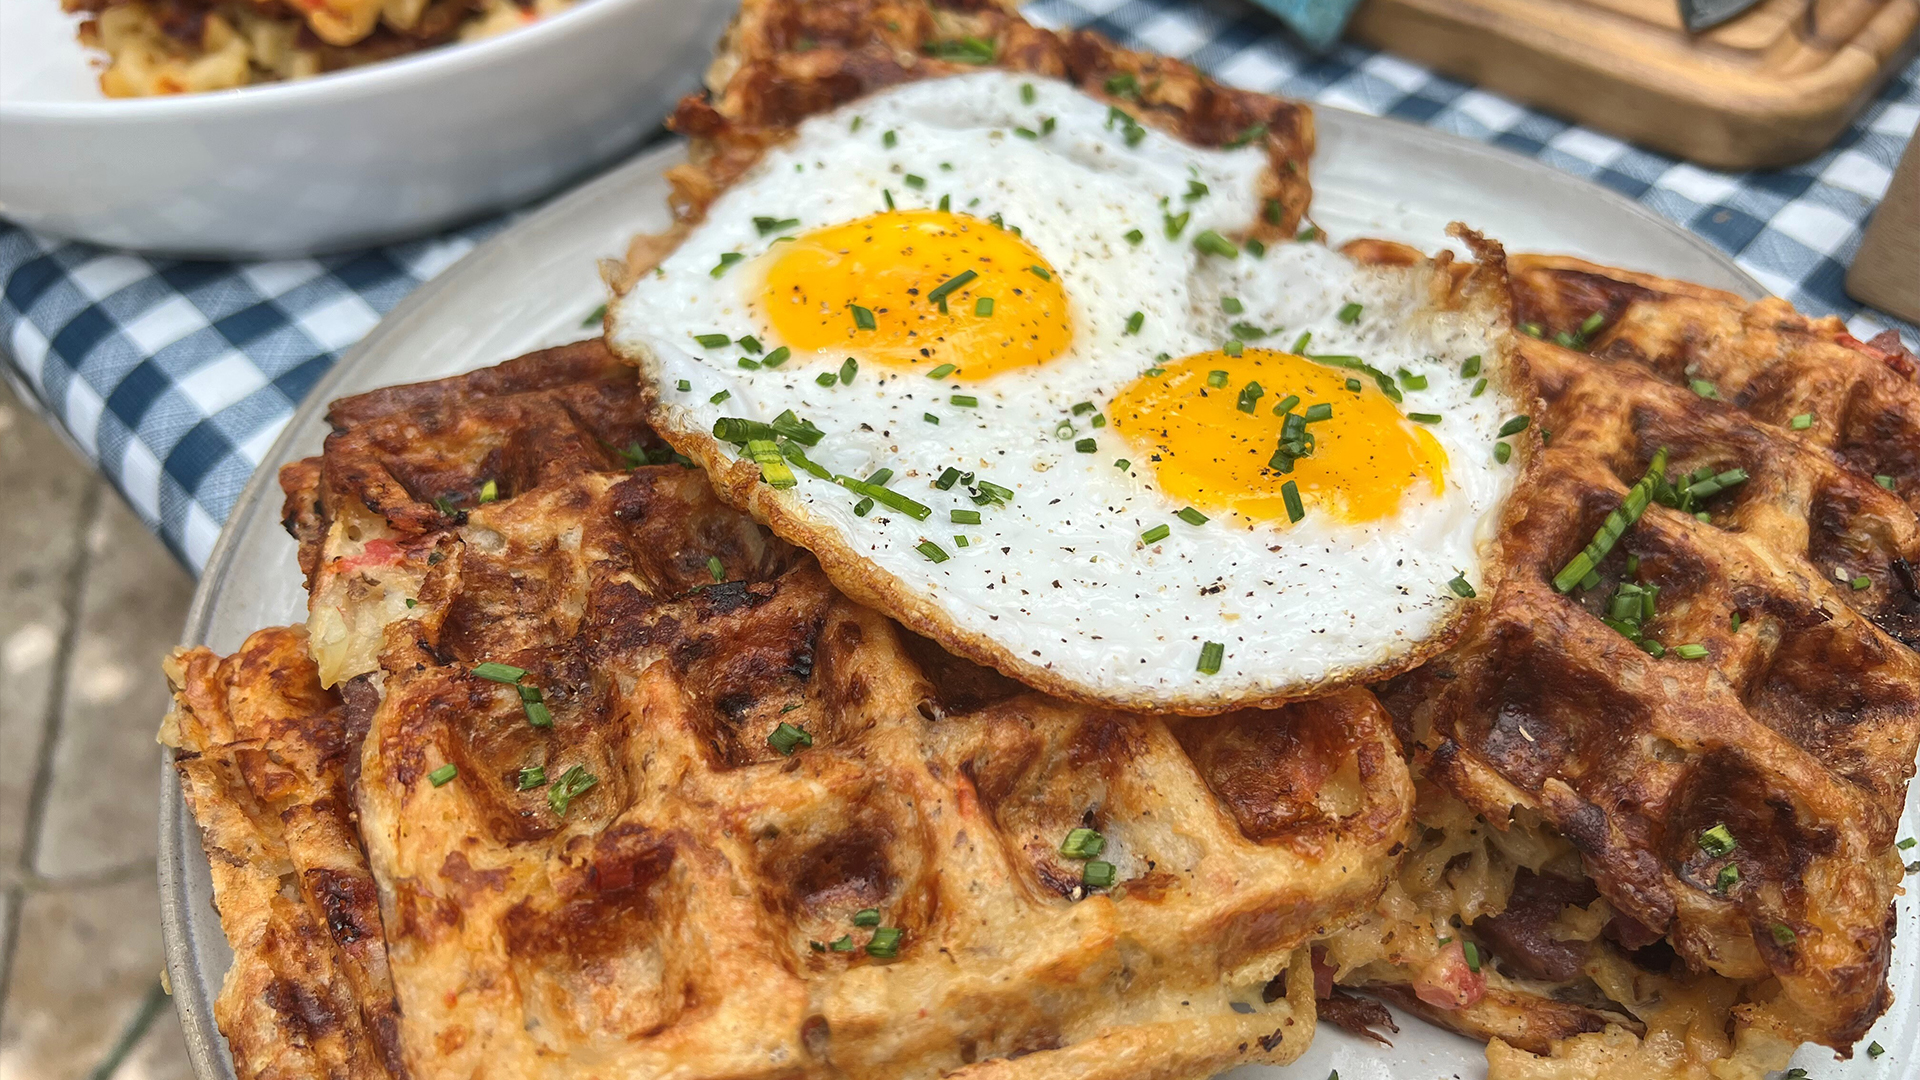 Three unique waffle recipes to step up your brunch game